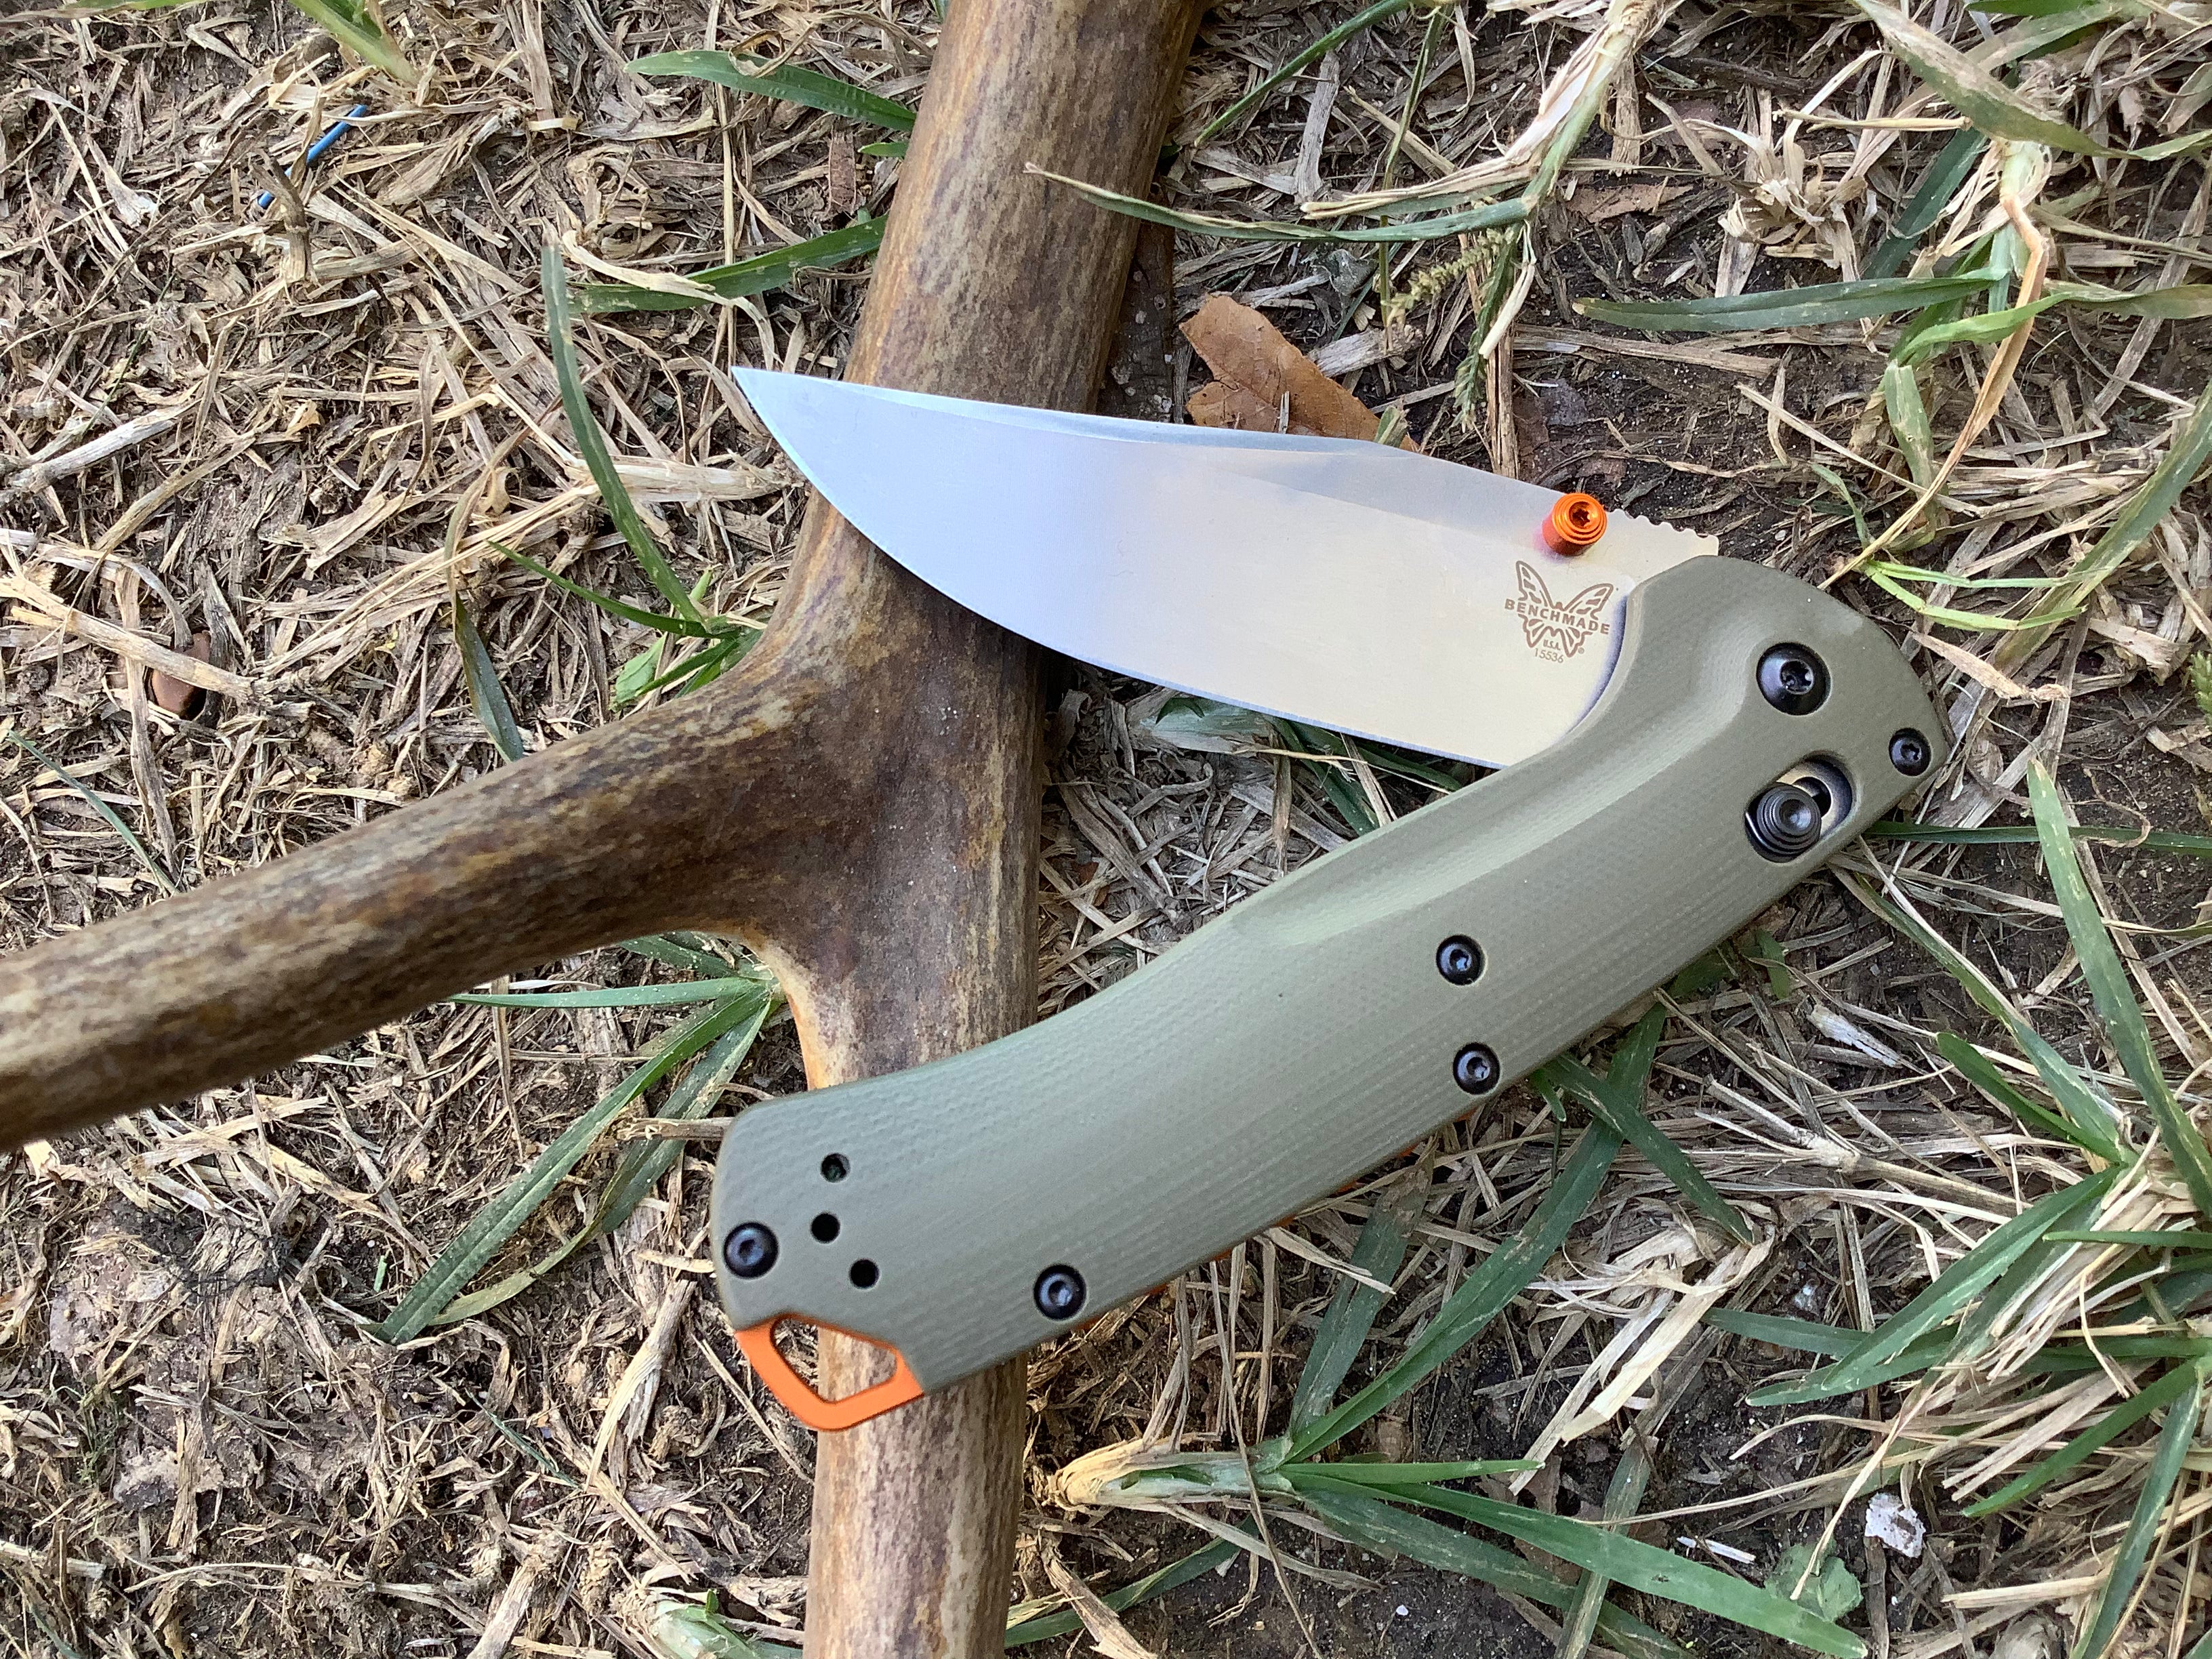 Taggedout Upgraded Version CPM S45VN OD Green G-10